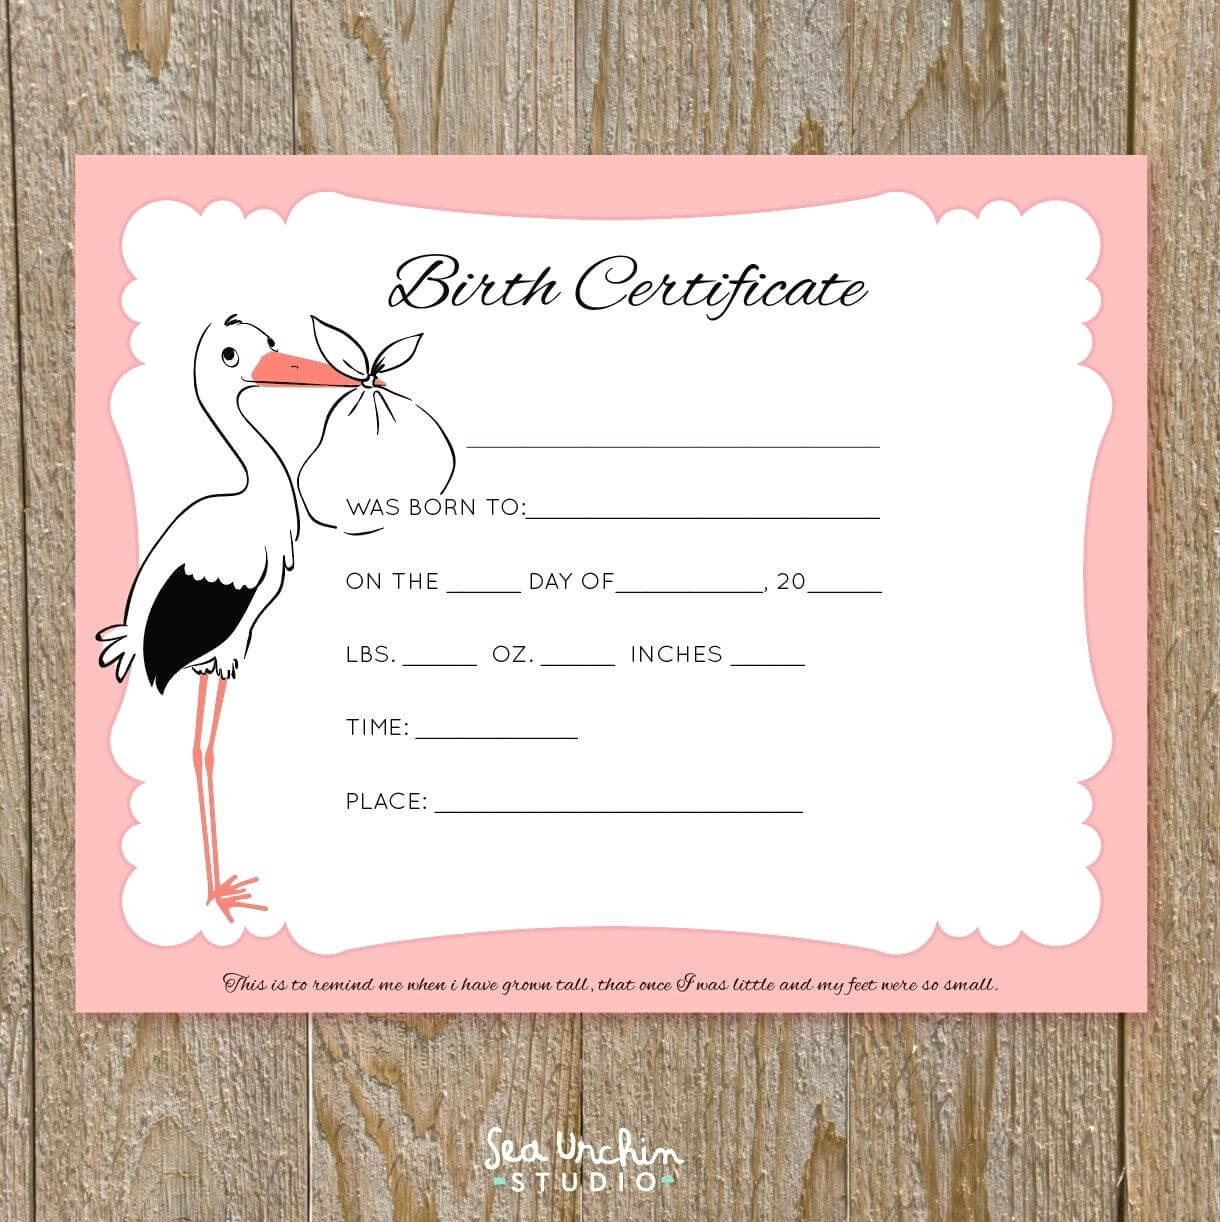 Baby Doll Birth Certificate Template Or With Free Printable Regarding Baby Doll Birth Certificate Template